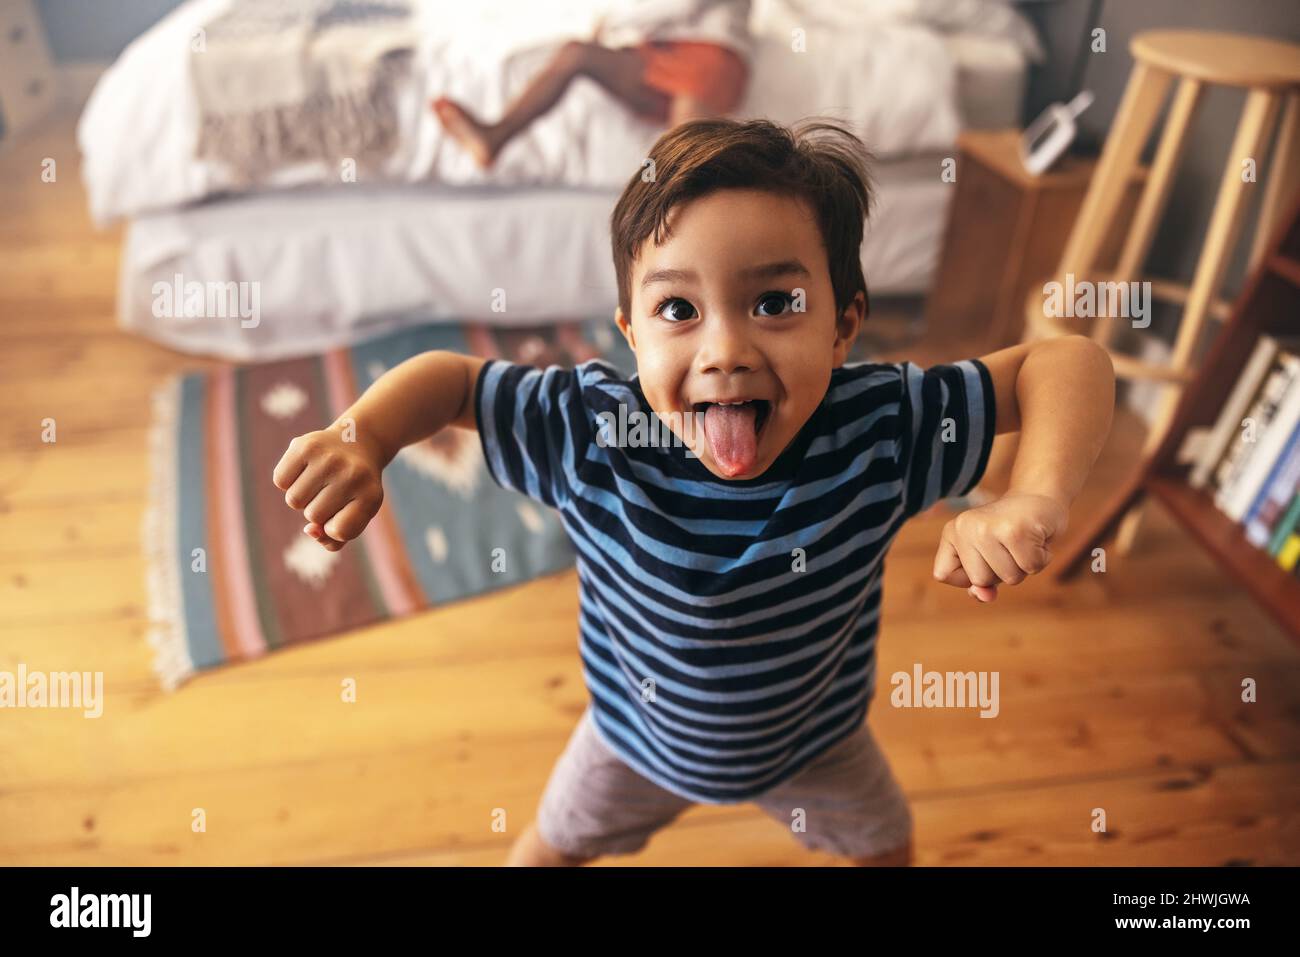 Cute young boy flexing his strength while standing in a bedroom with his sister in the background. Adorable little boy sticking his tongue out playful Stock Photo